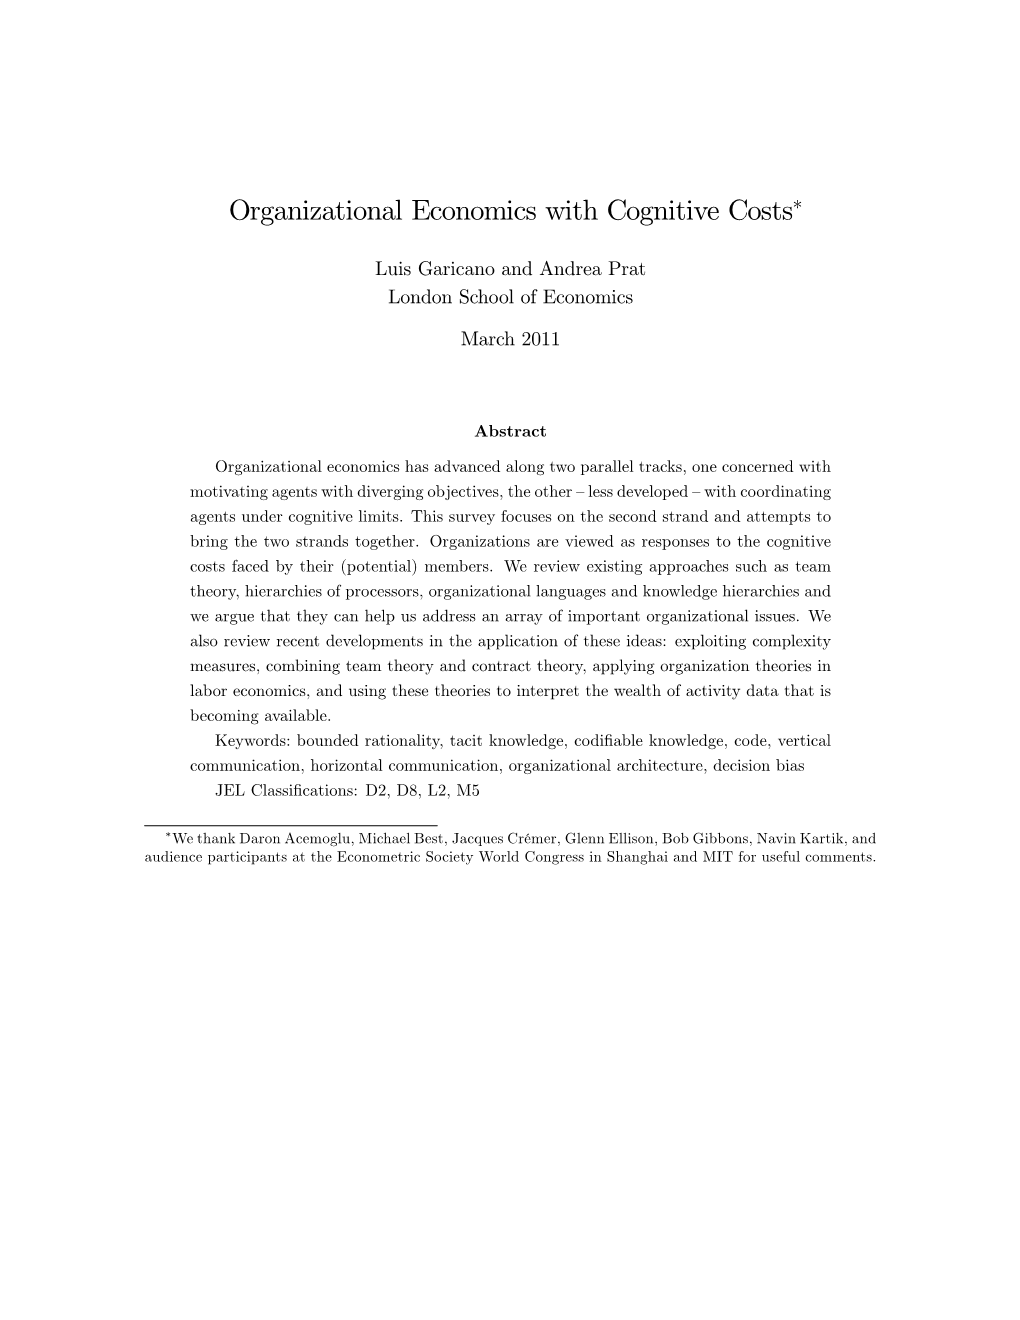 Organizational Economics with Cognitive Costs"